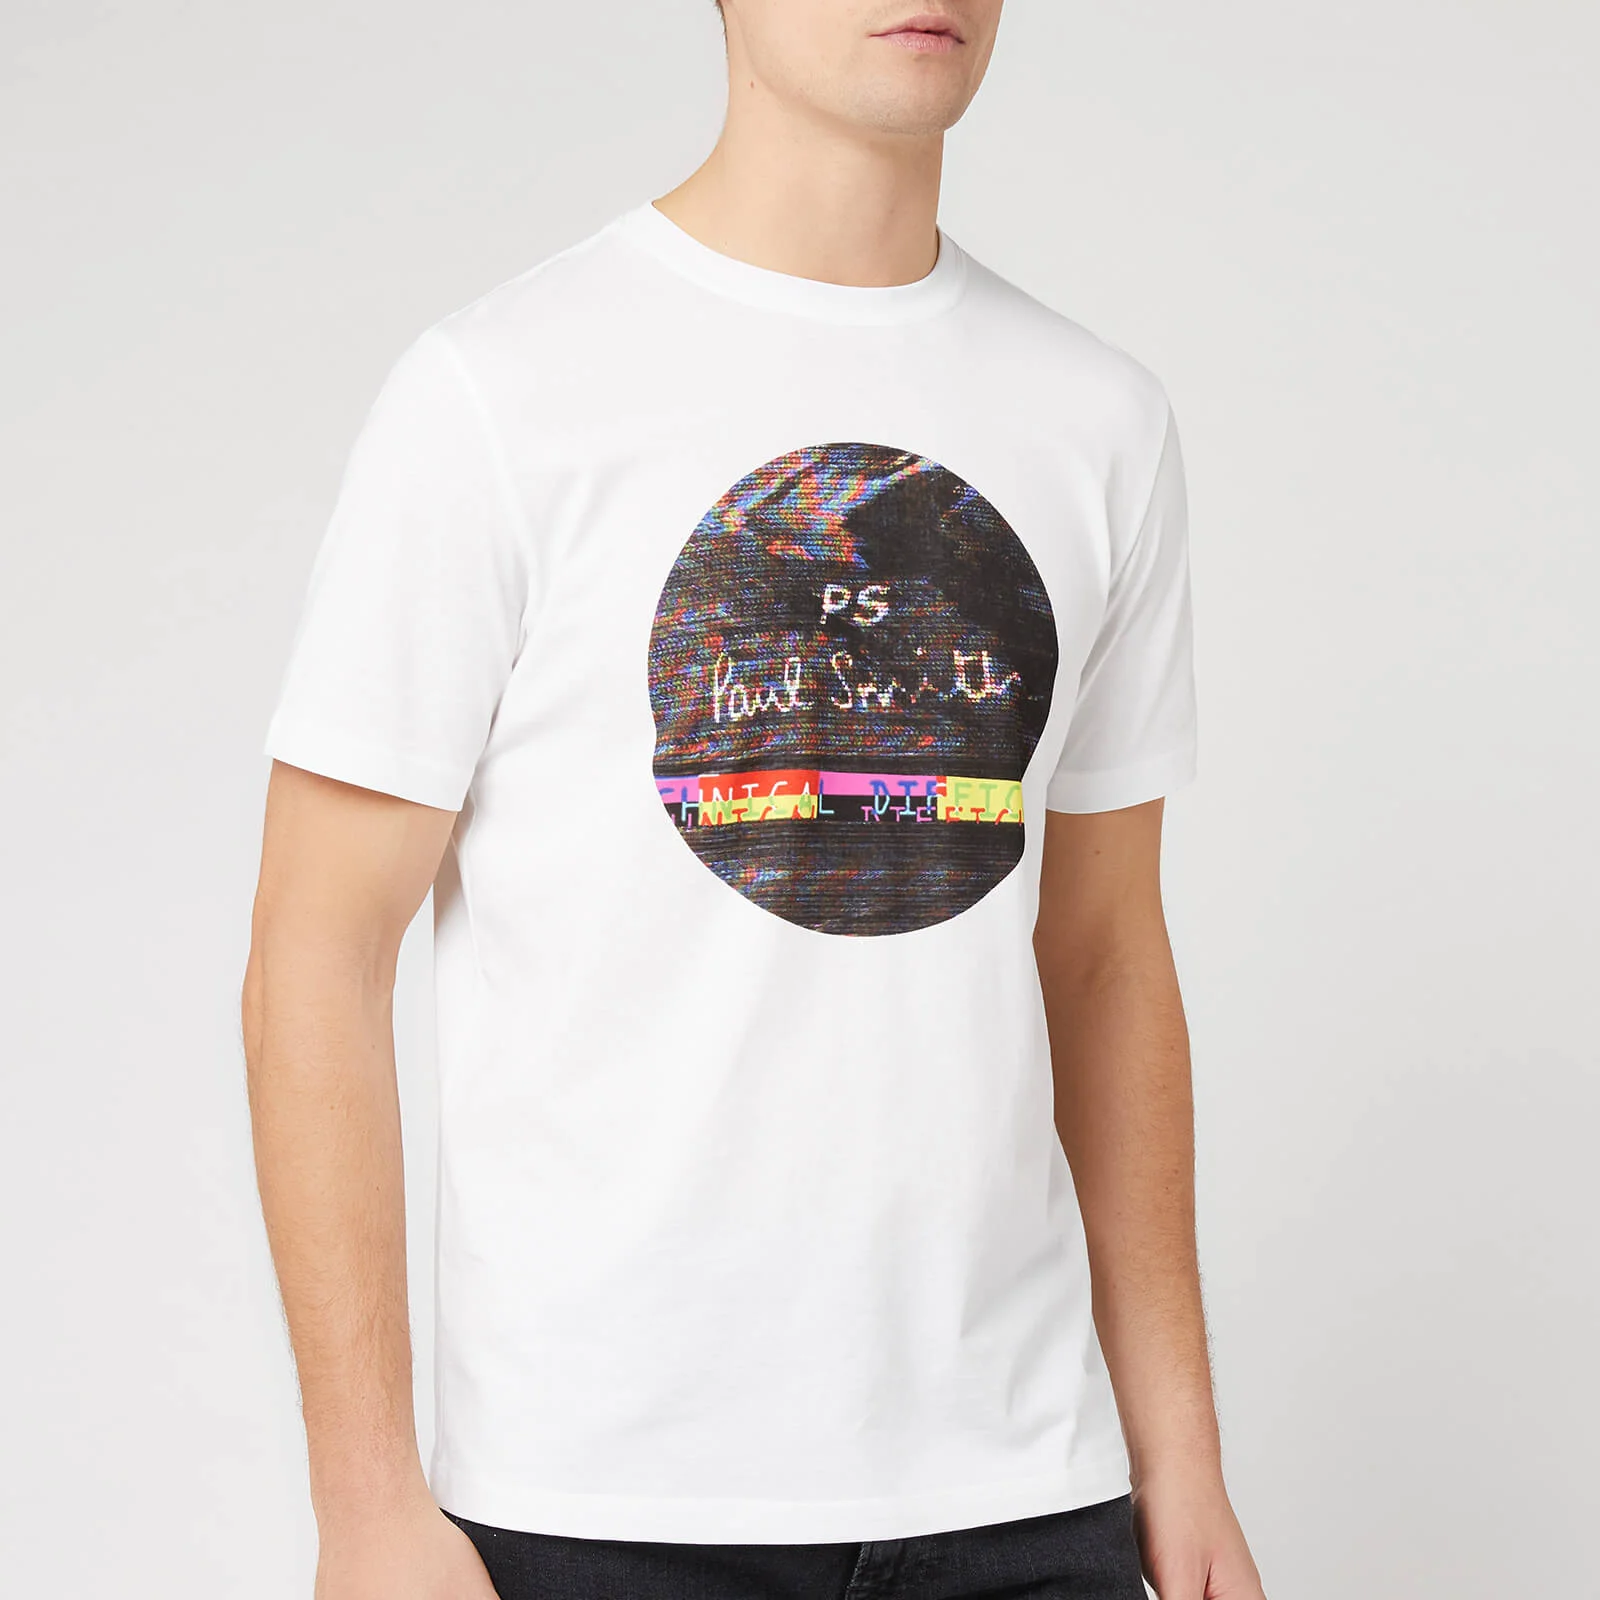 PS Paul Smith Men's Regular Fit Interference T-Shirt - White Image 1